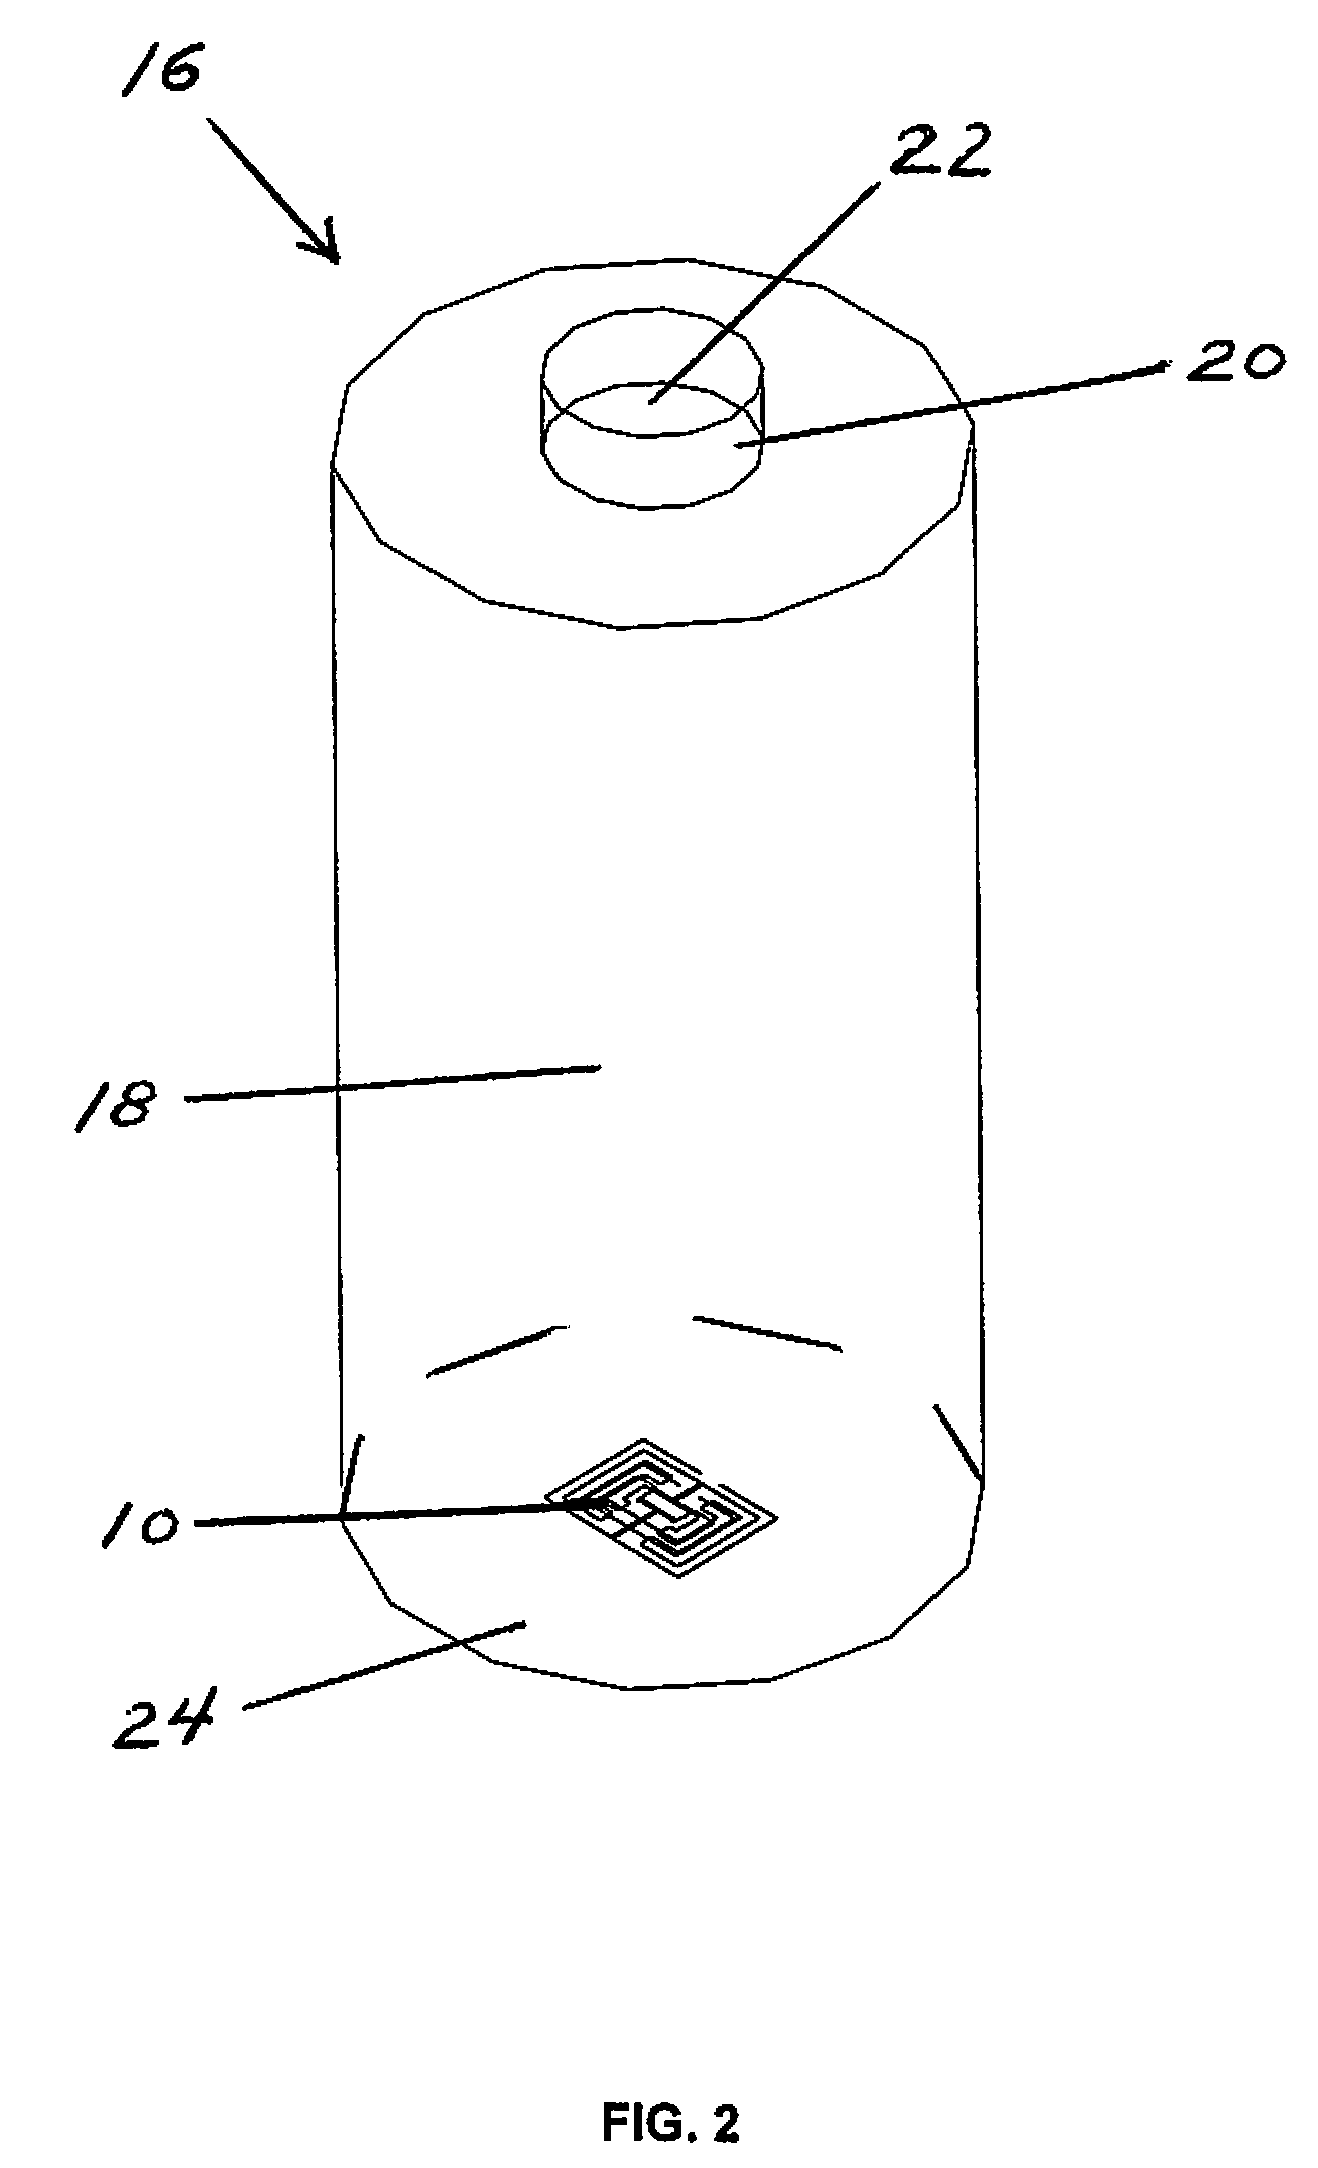 Method for molding an object containing a radio frequency identification tag